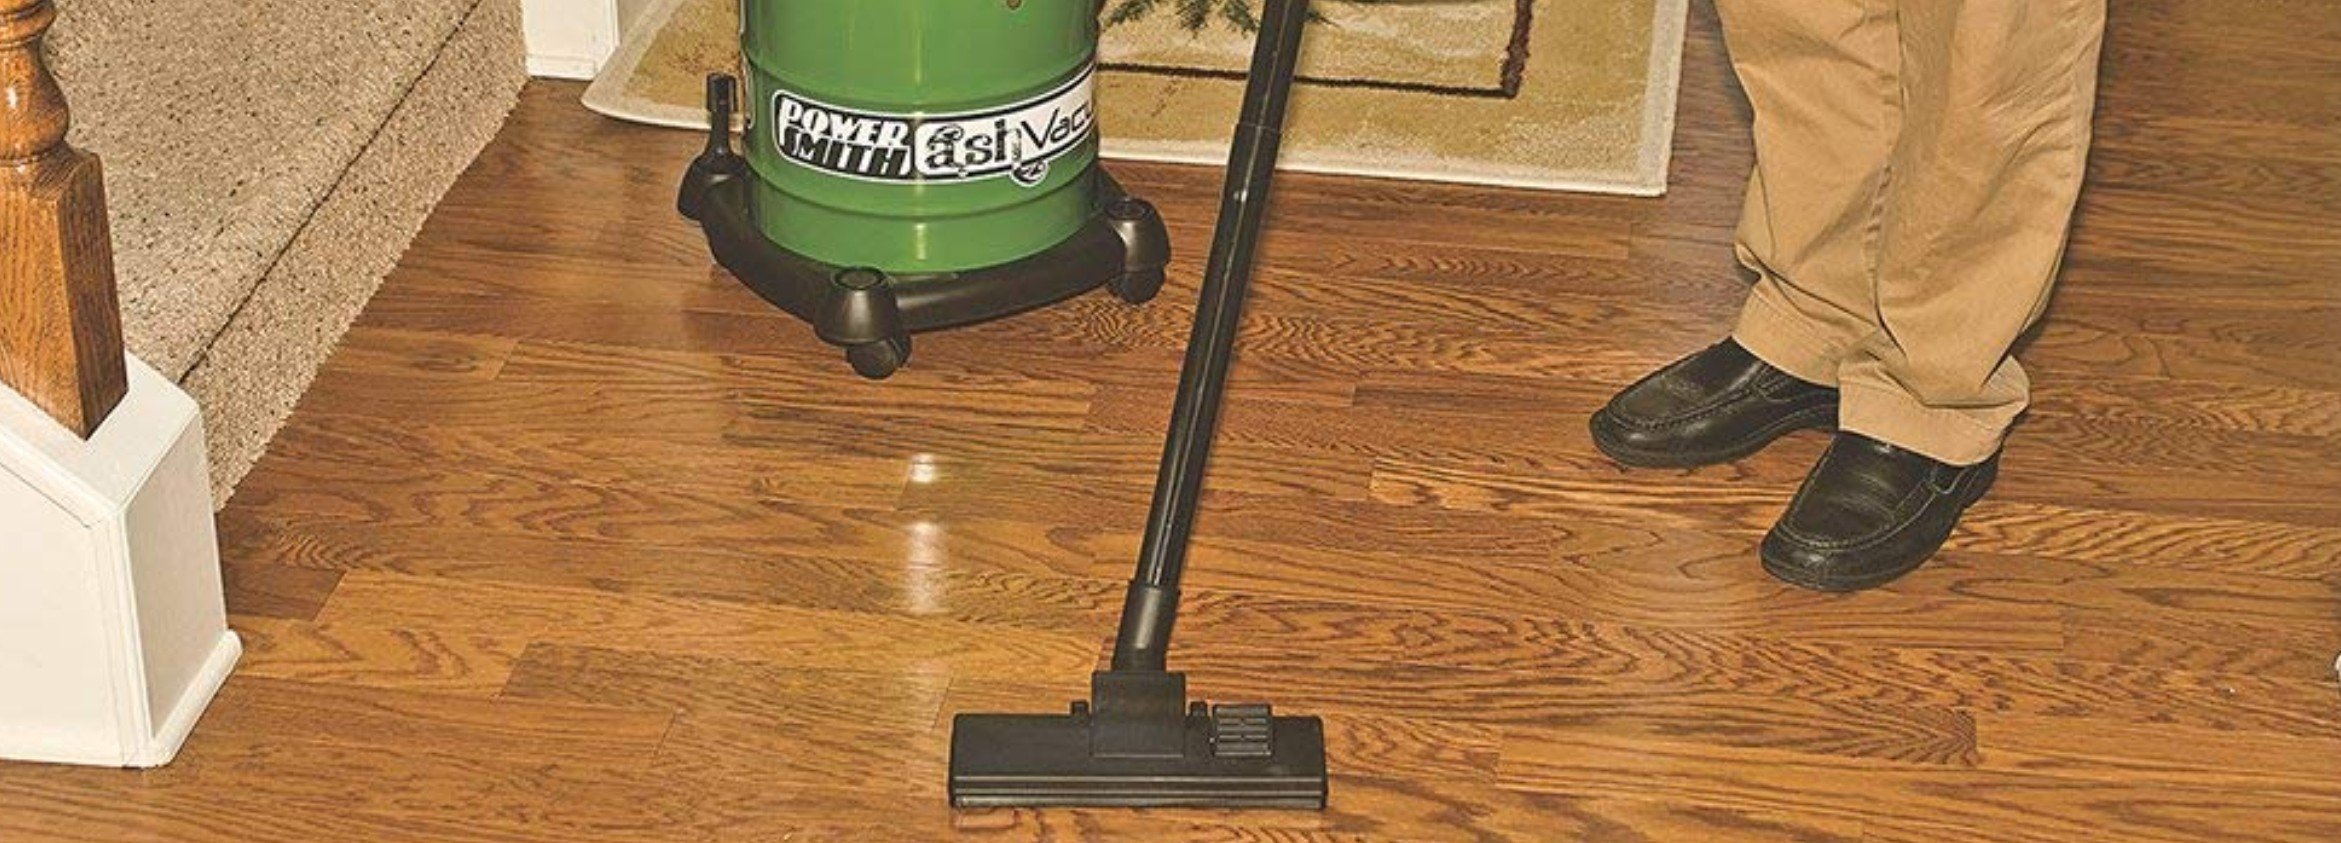 Best Ash Vacuum Cleaners Guide